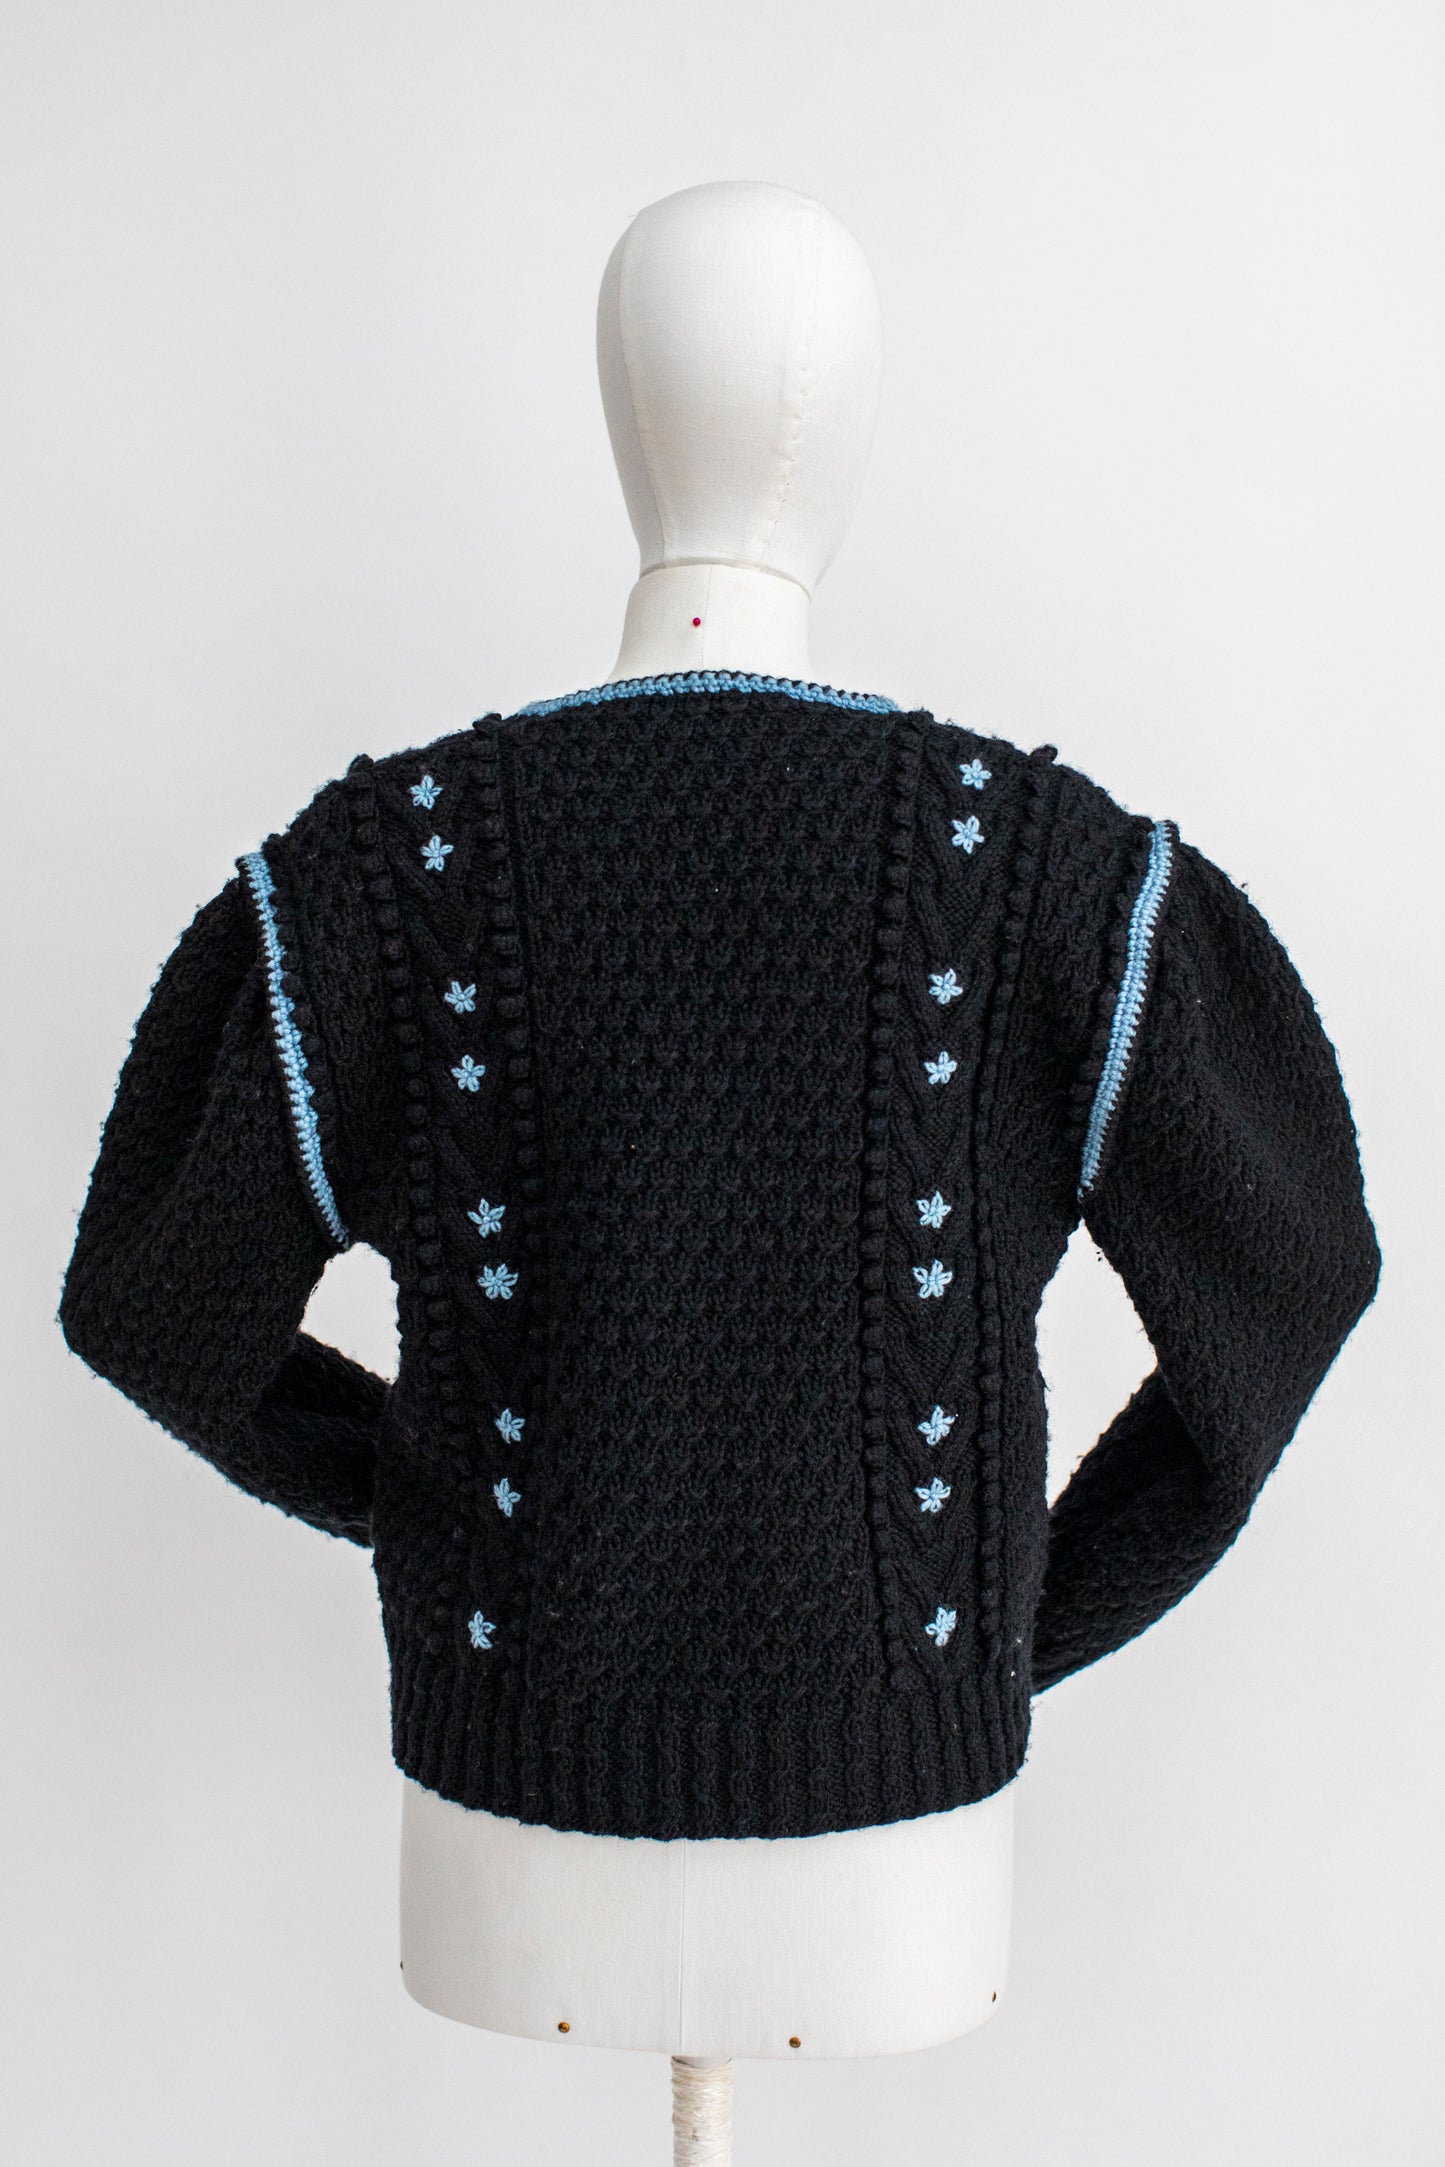 Vintage Blue Hand Knitted Austrian Cardigan with Floral Embroidery Size S-M